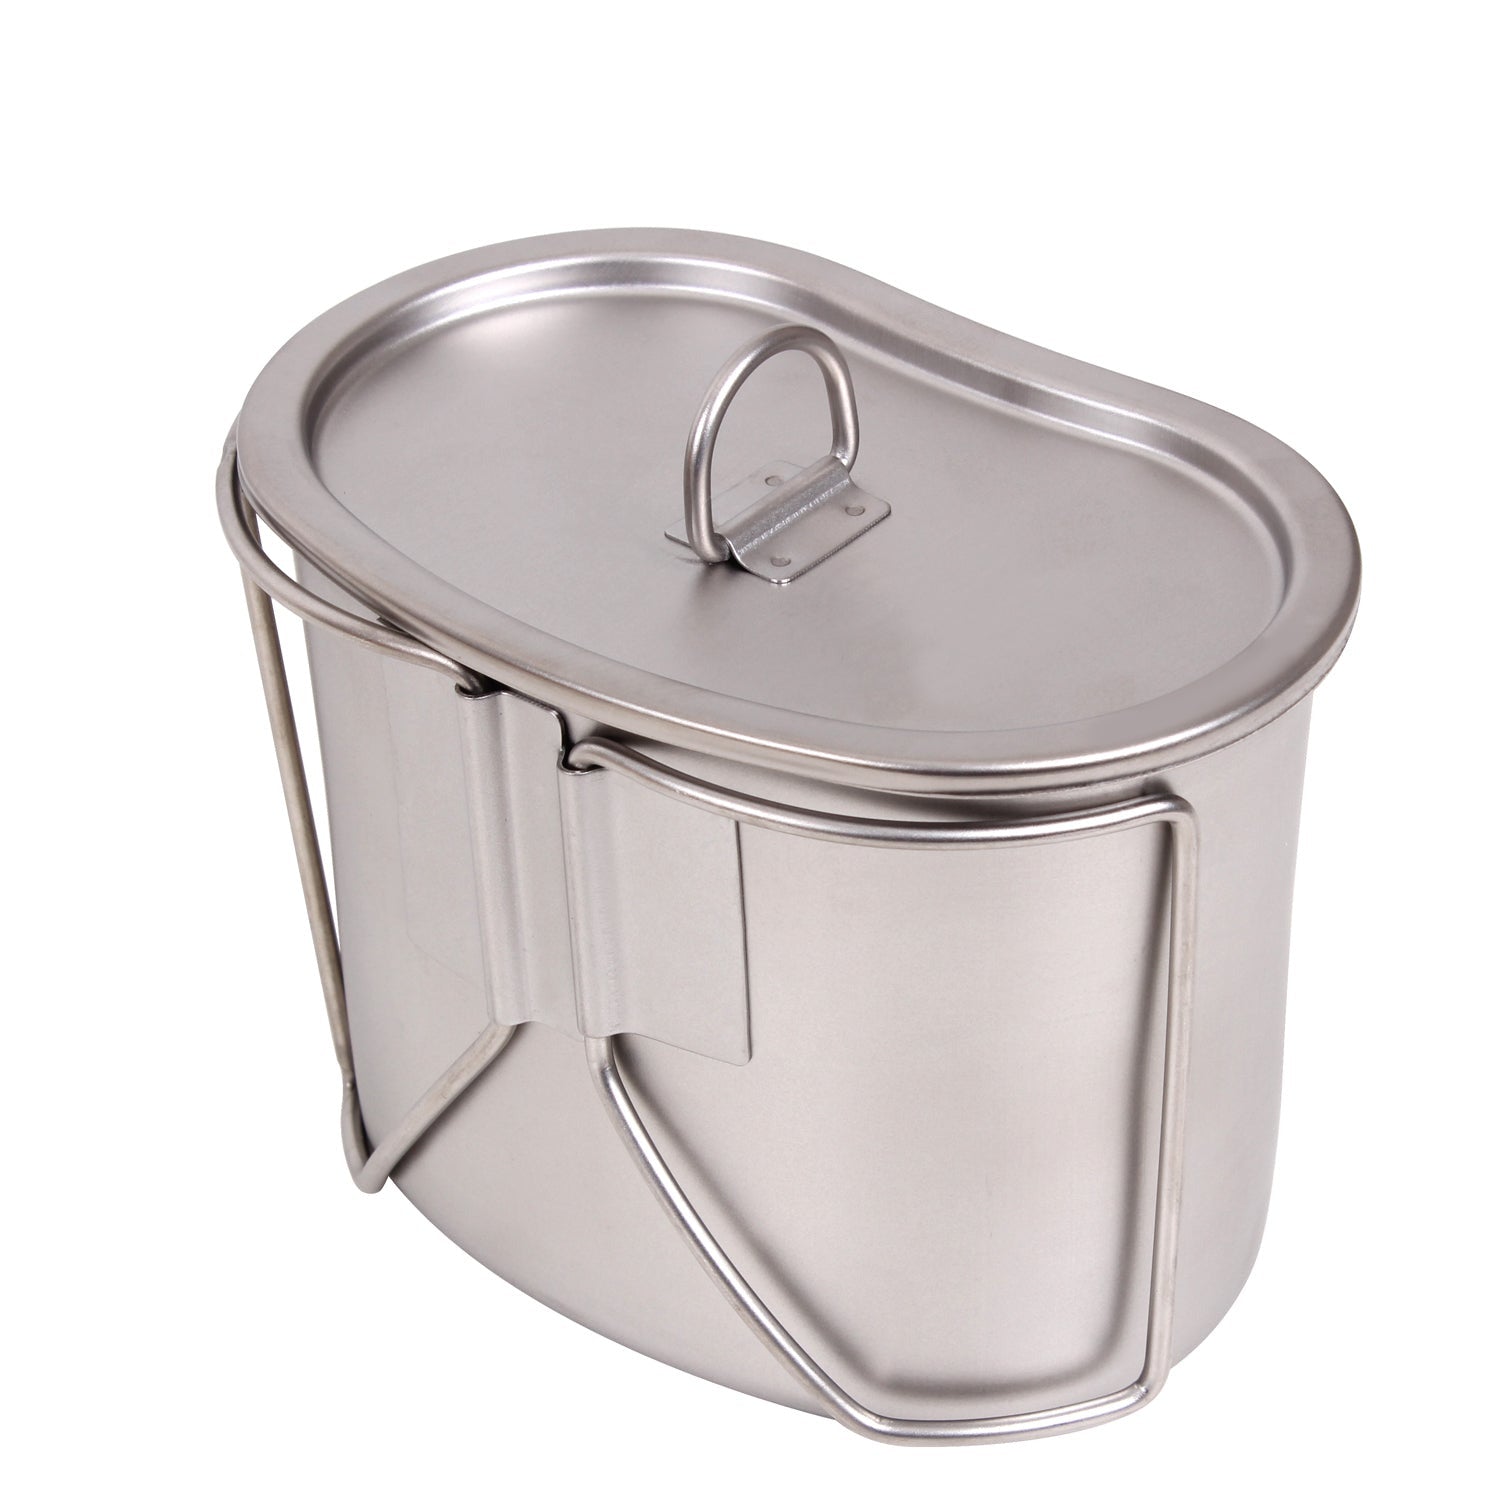 Rothco's Stainless Steel Canteen Cup and Cover Set is ideal for camping, bug out bags, and cooking. 